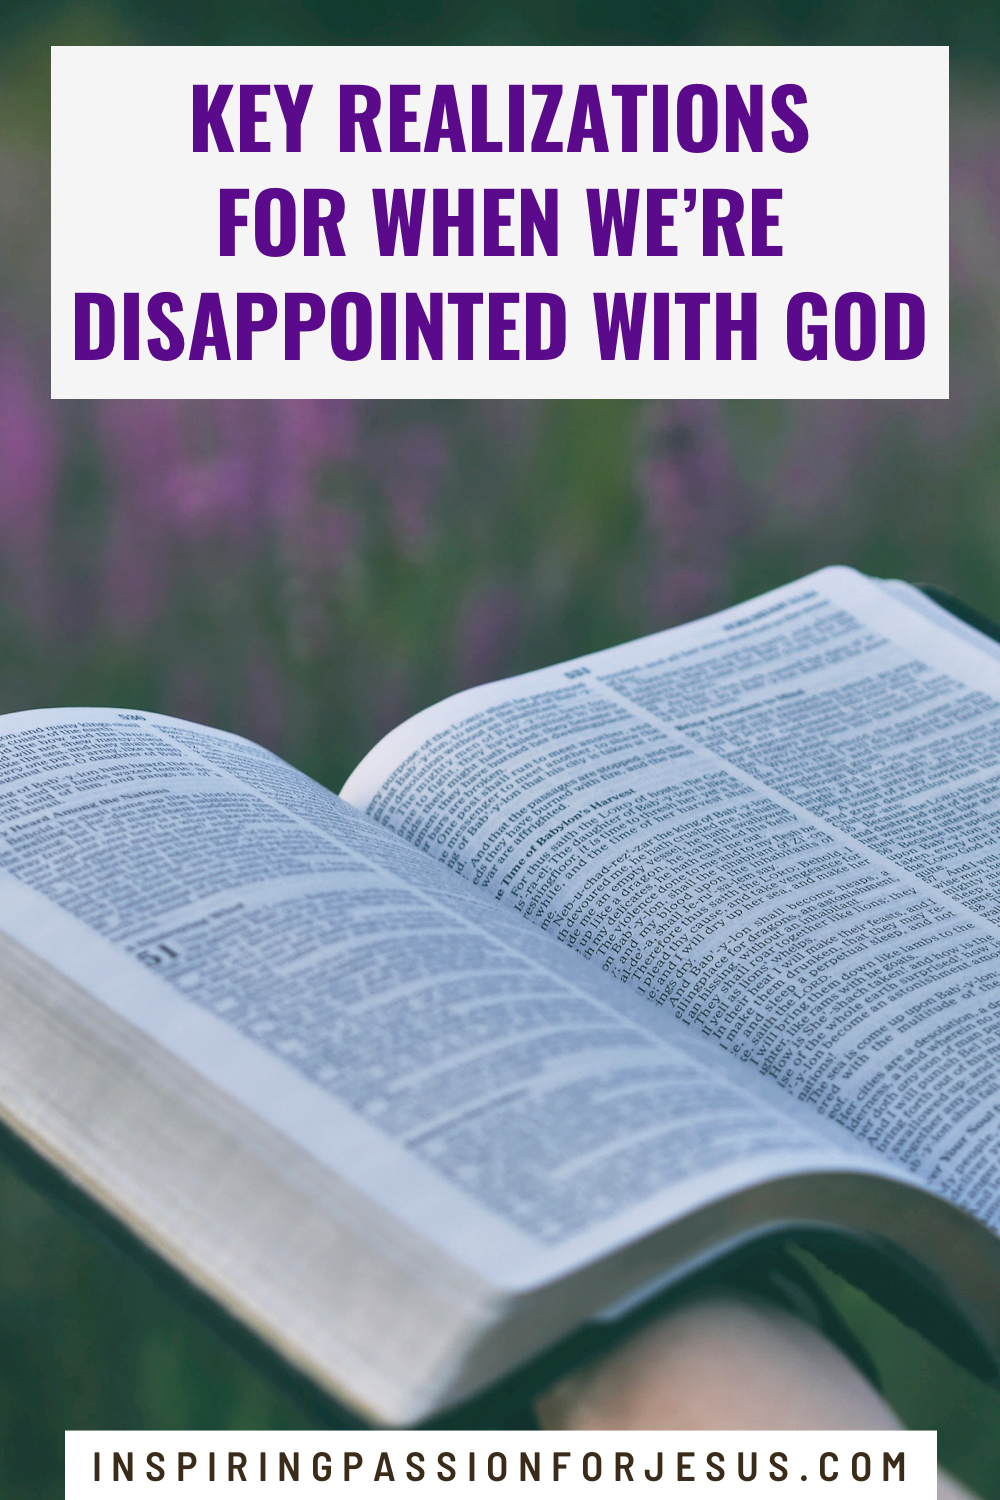 Key Realizations for When We're Disappointed with God - Blog Post Image